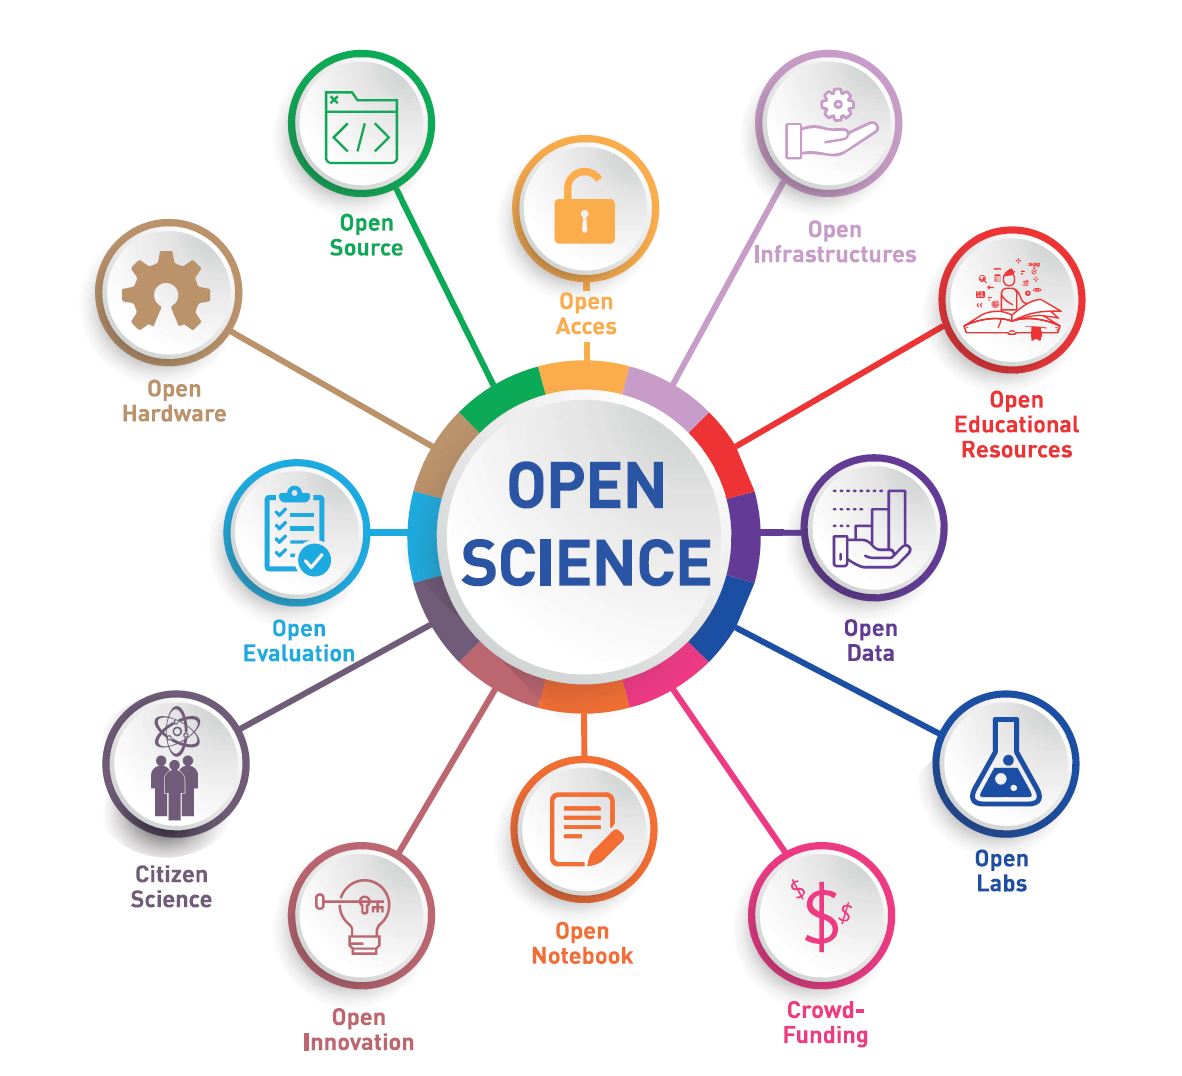 Citizen Science perspectives on Open Science – questionnaire